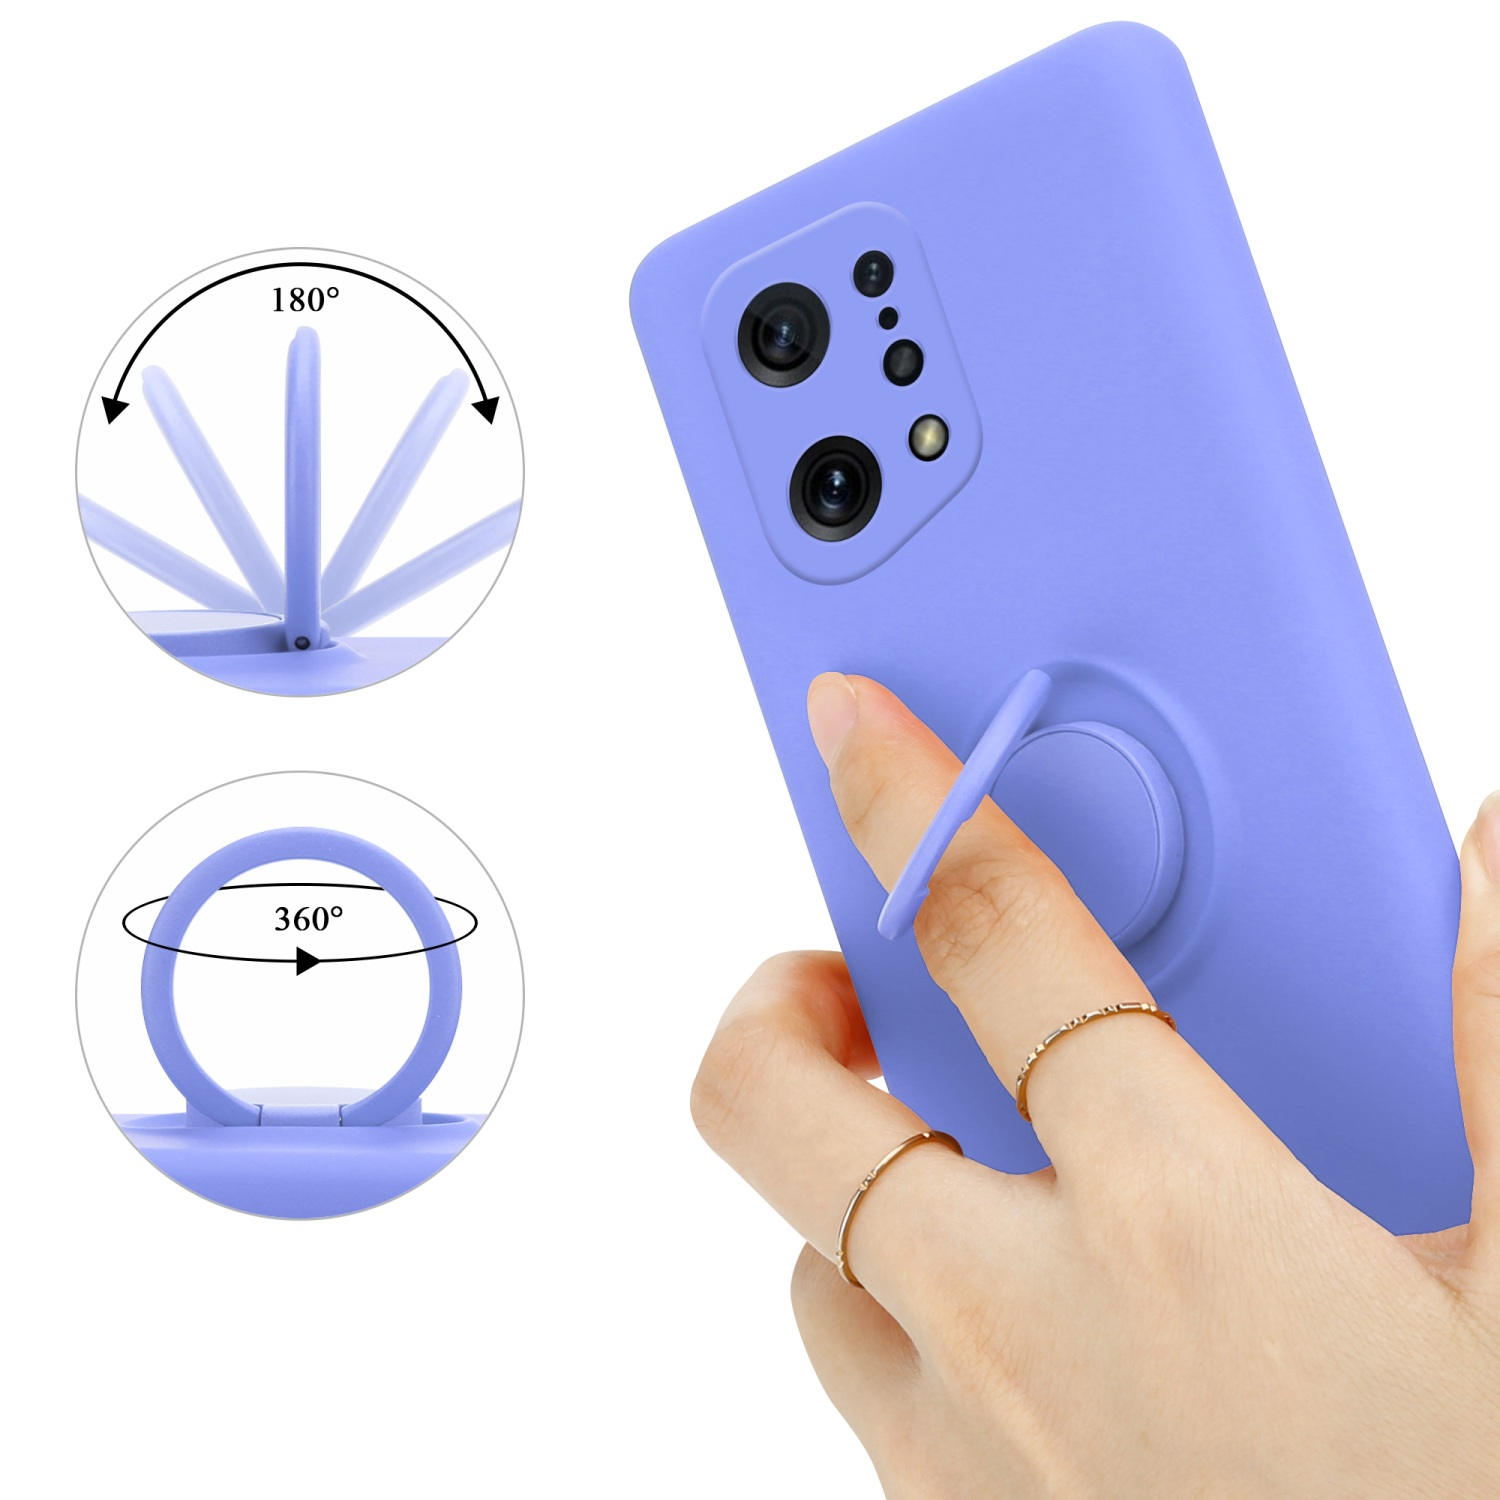 Liquid im FIND Ring LIQUID CADORABO Hülle X5, LILA Backcover, HELL Oppo, Case Silicone Style,